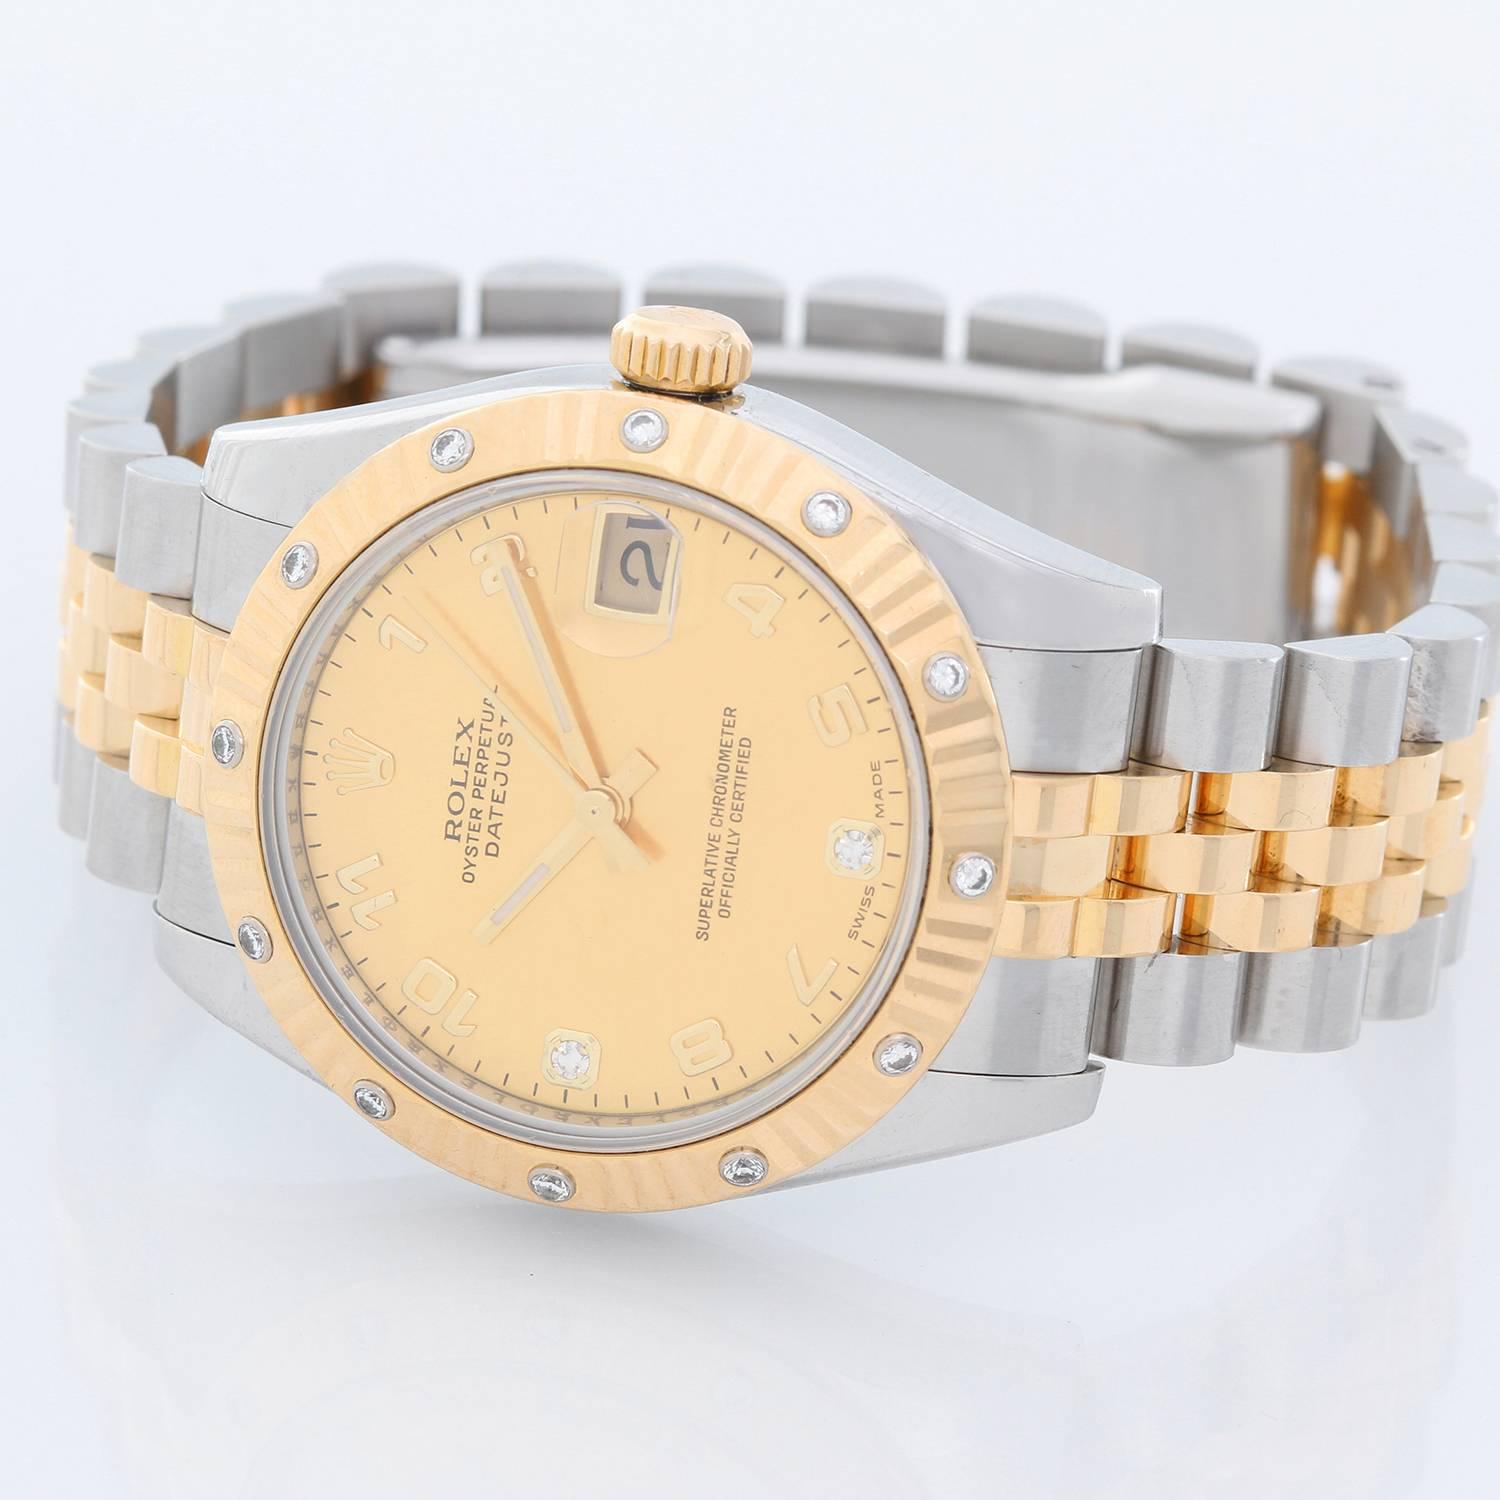 Rolex Midsize 2-Tone 12 Diamond Bezel Datejust Men's/Ladies Watch 178313 - Automatic winding, 31 jewels, sapphire crystal. Stainless steel case with factory 12 diamond bezel. Champagne factory diamond dial with gold Arabic numerals. Stainless steel